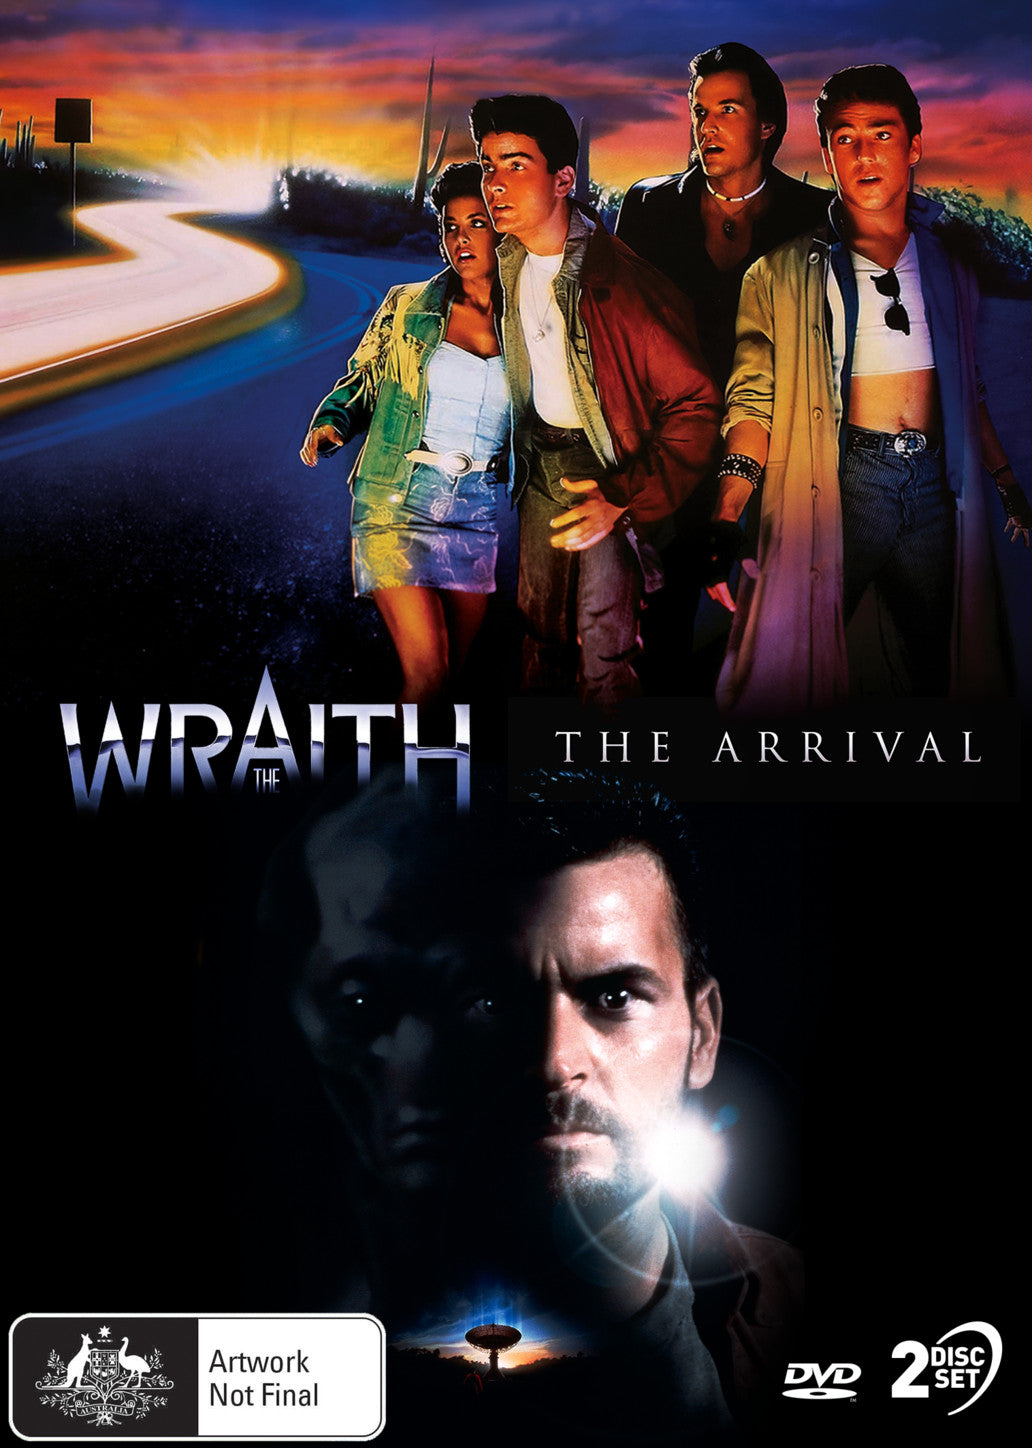 SCI-FI DOUBLE PACK: THE WRAITH / THE ARRIVAL